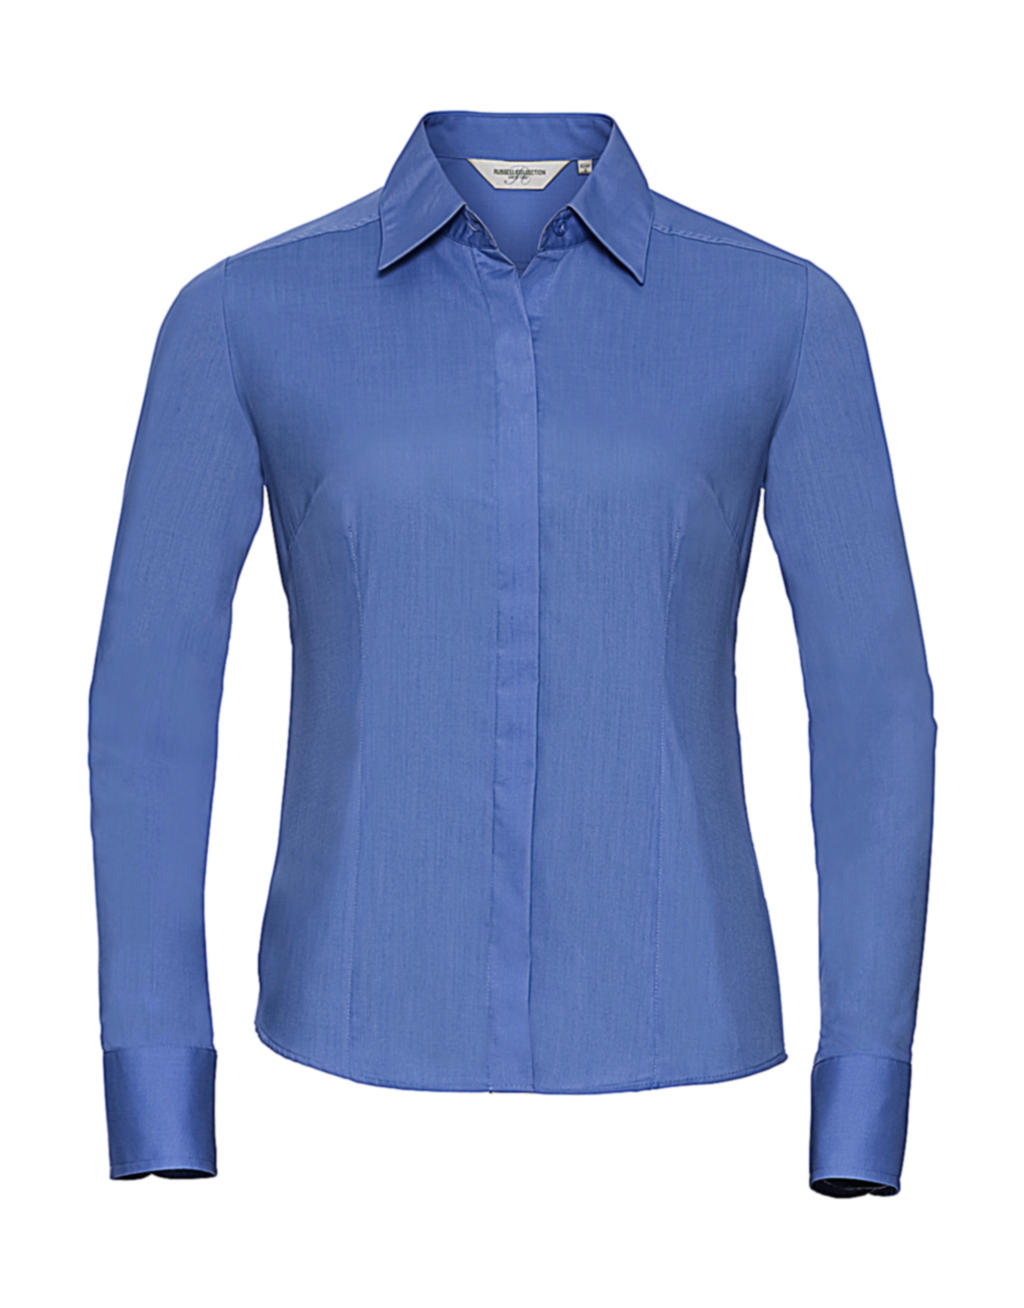  Ladies LS Fitted Poplin Shirt in Farbe Corporate Blue